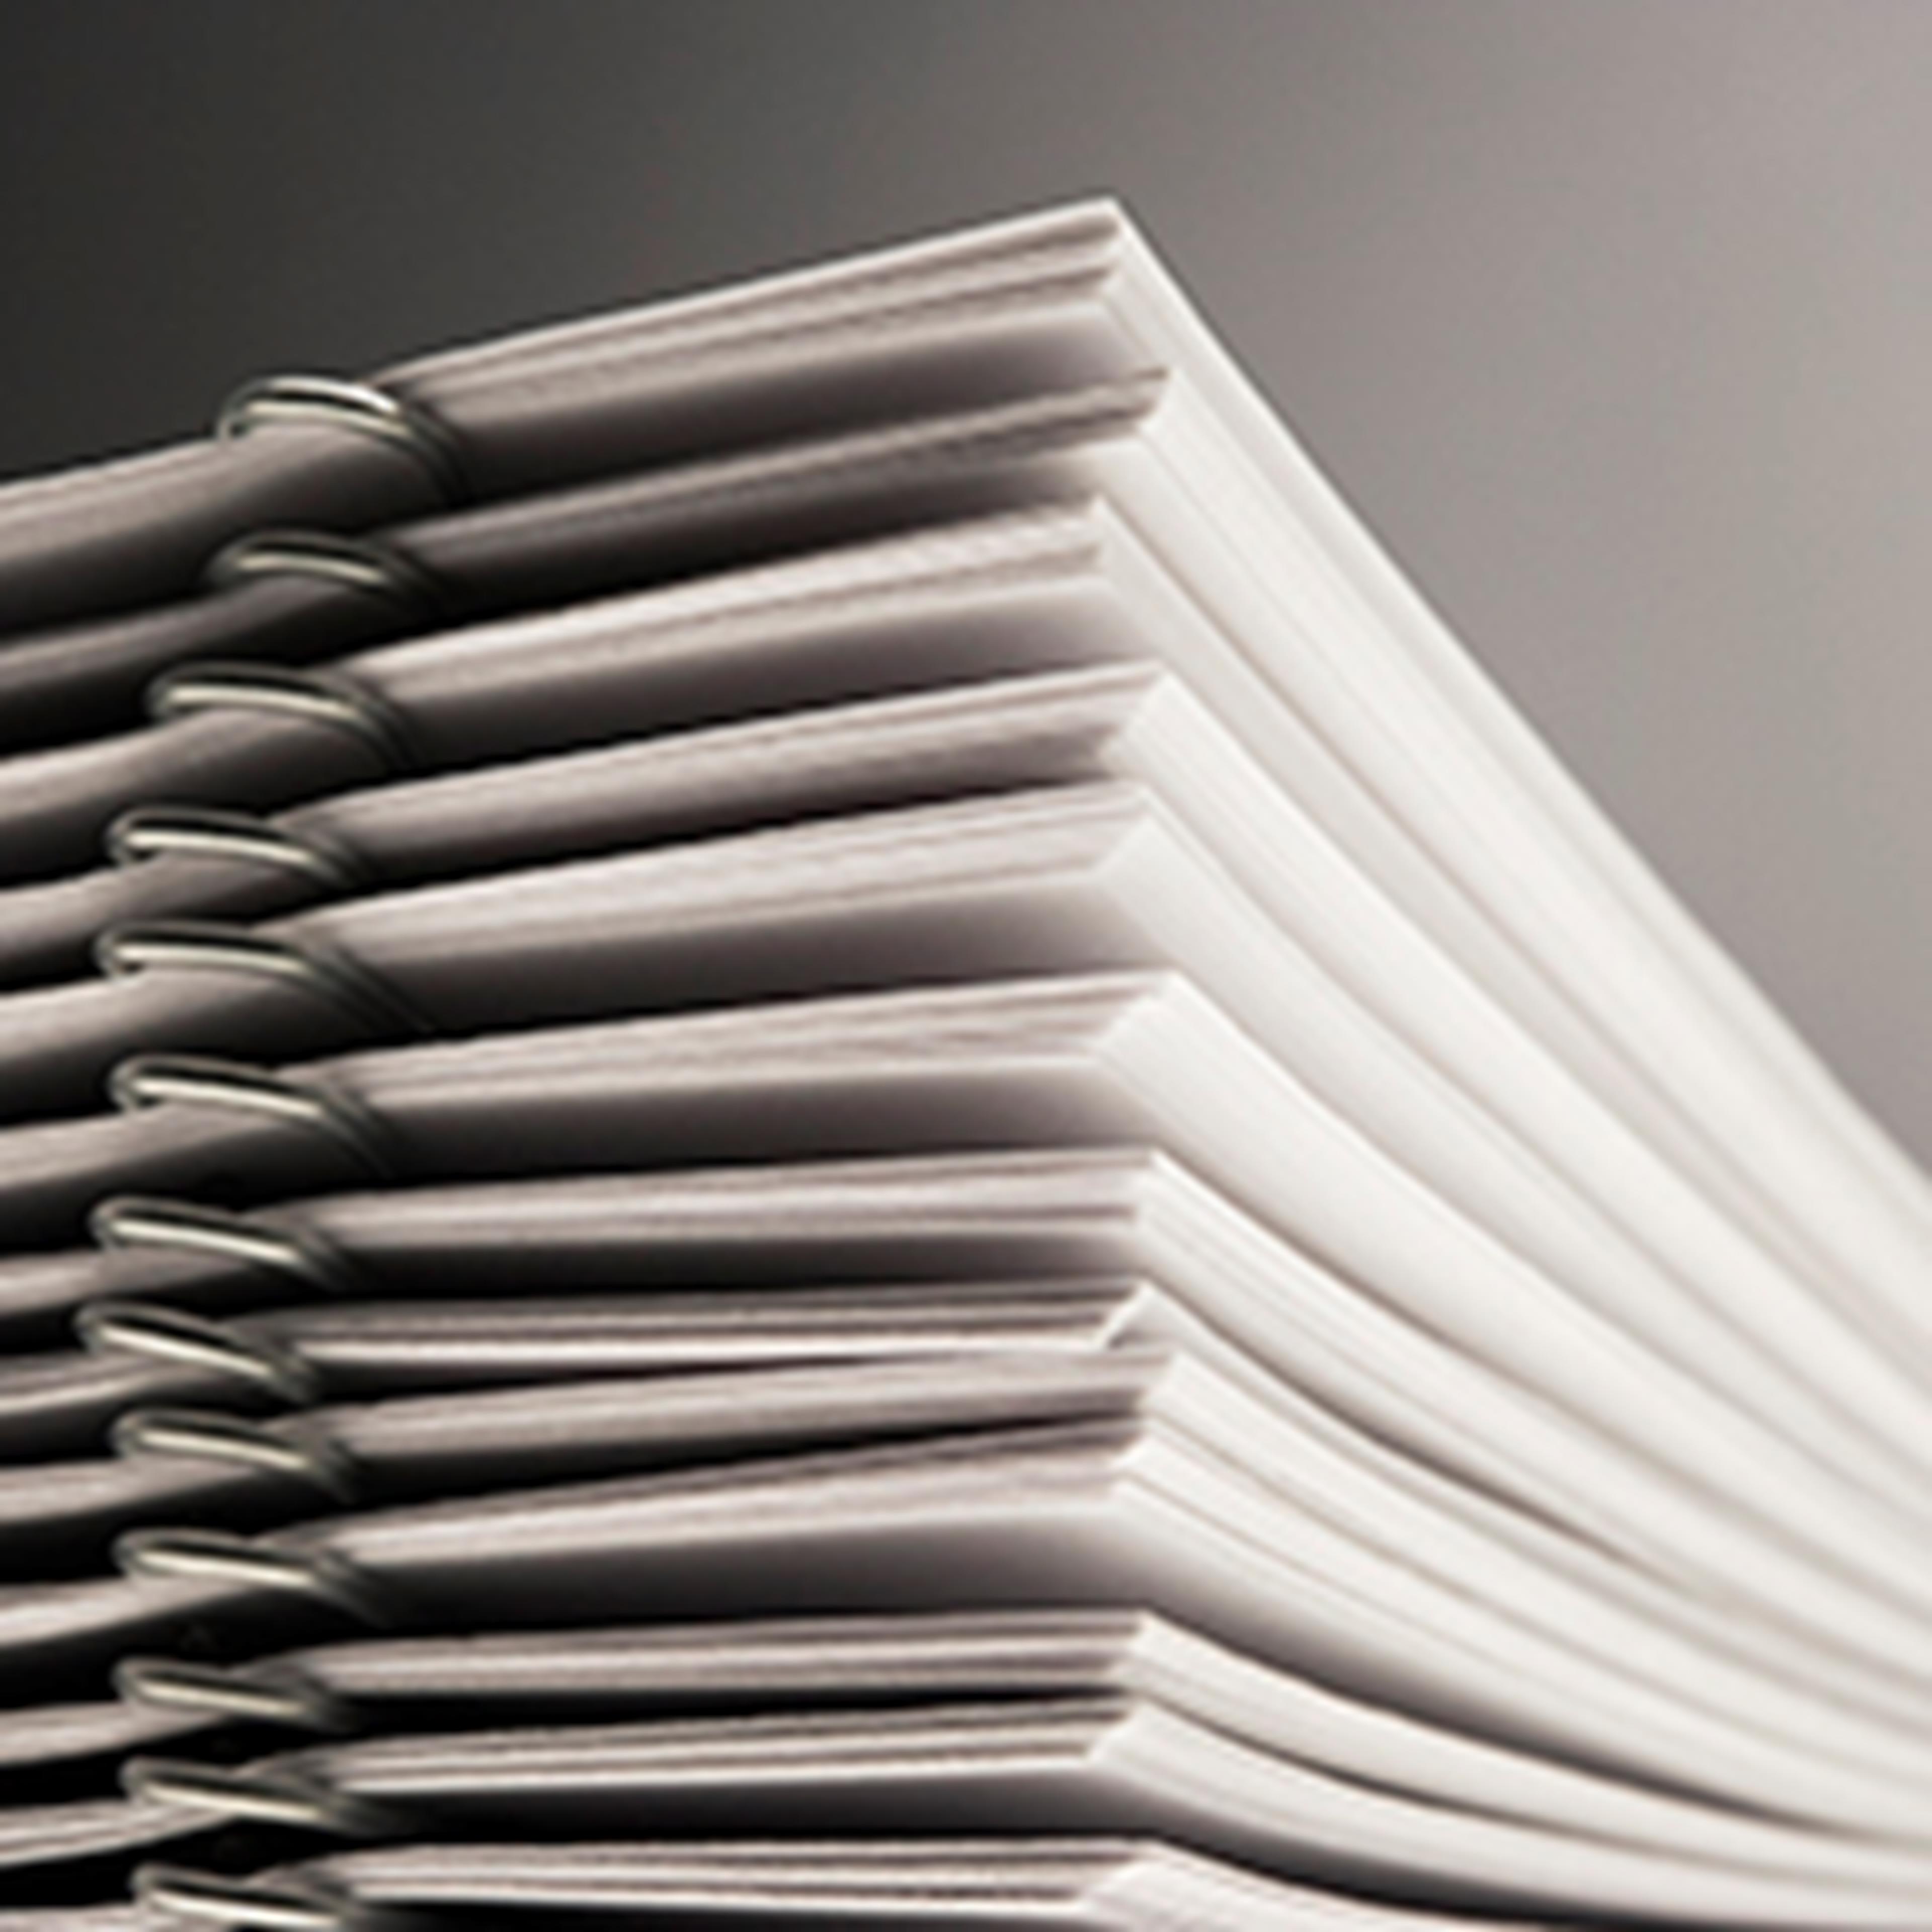 Stack of documents against a grey background